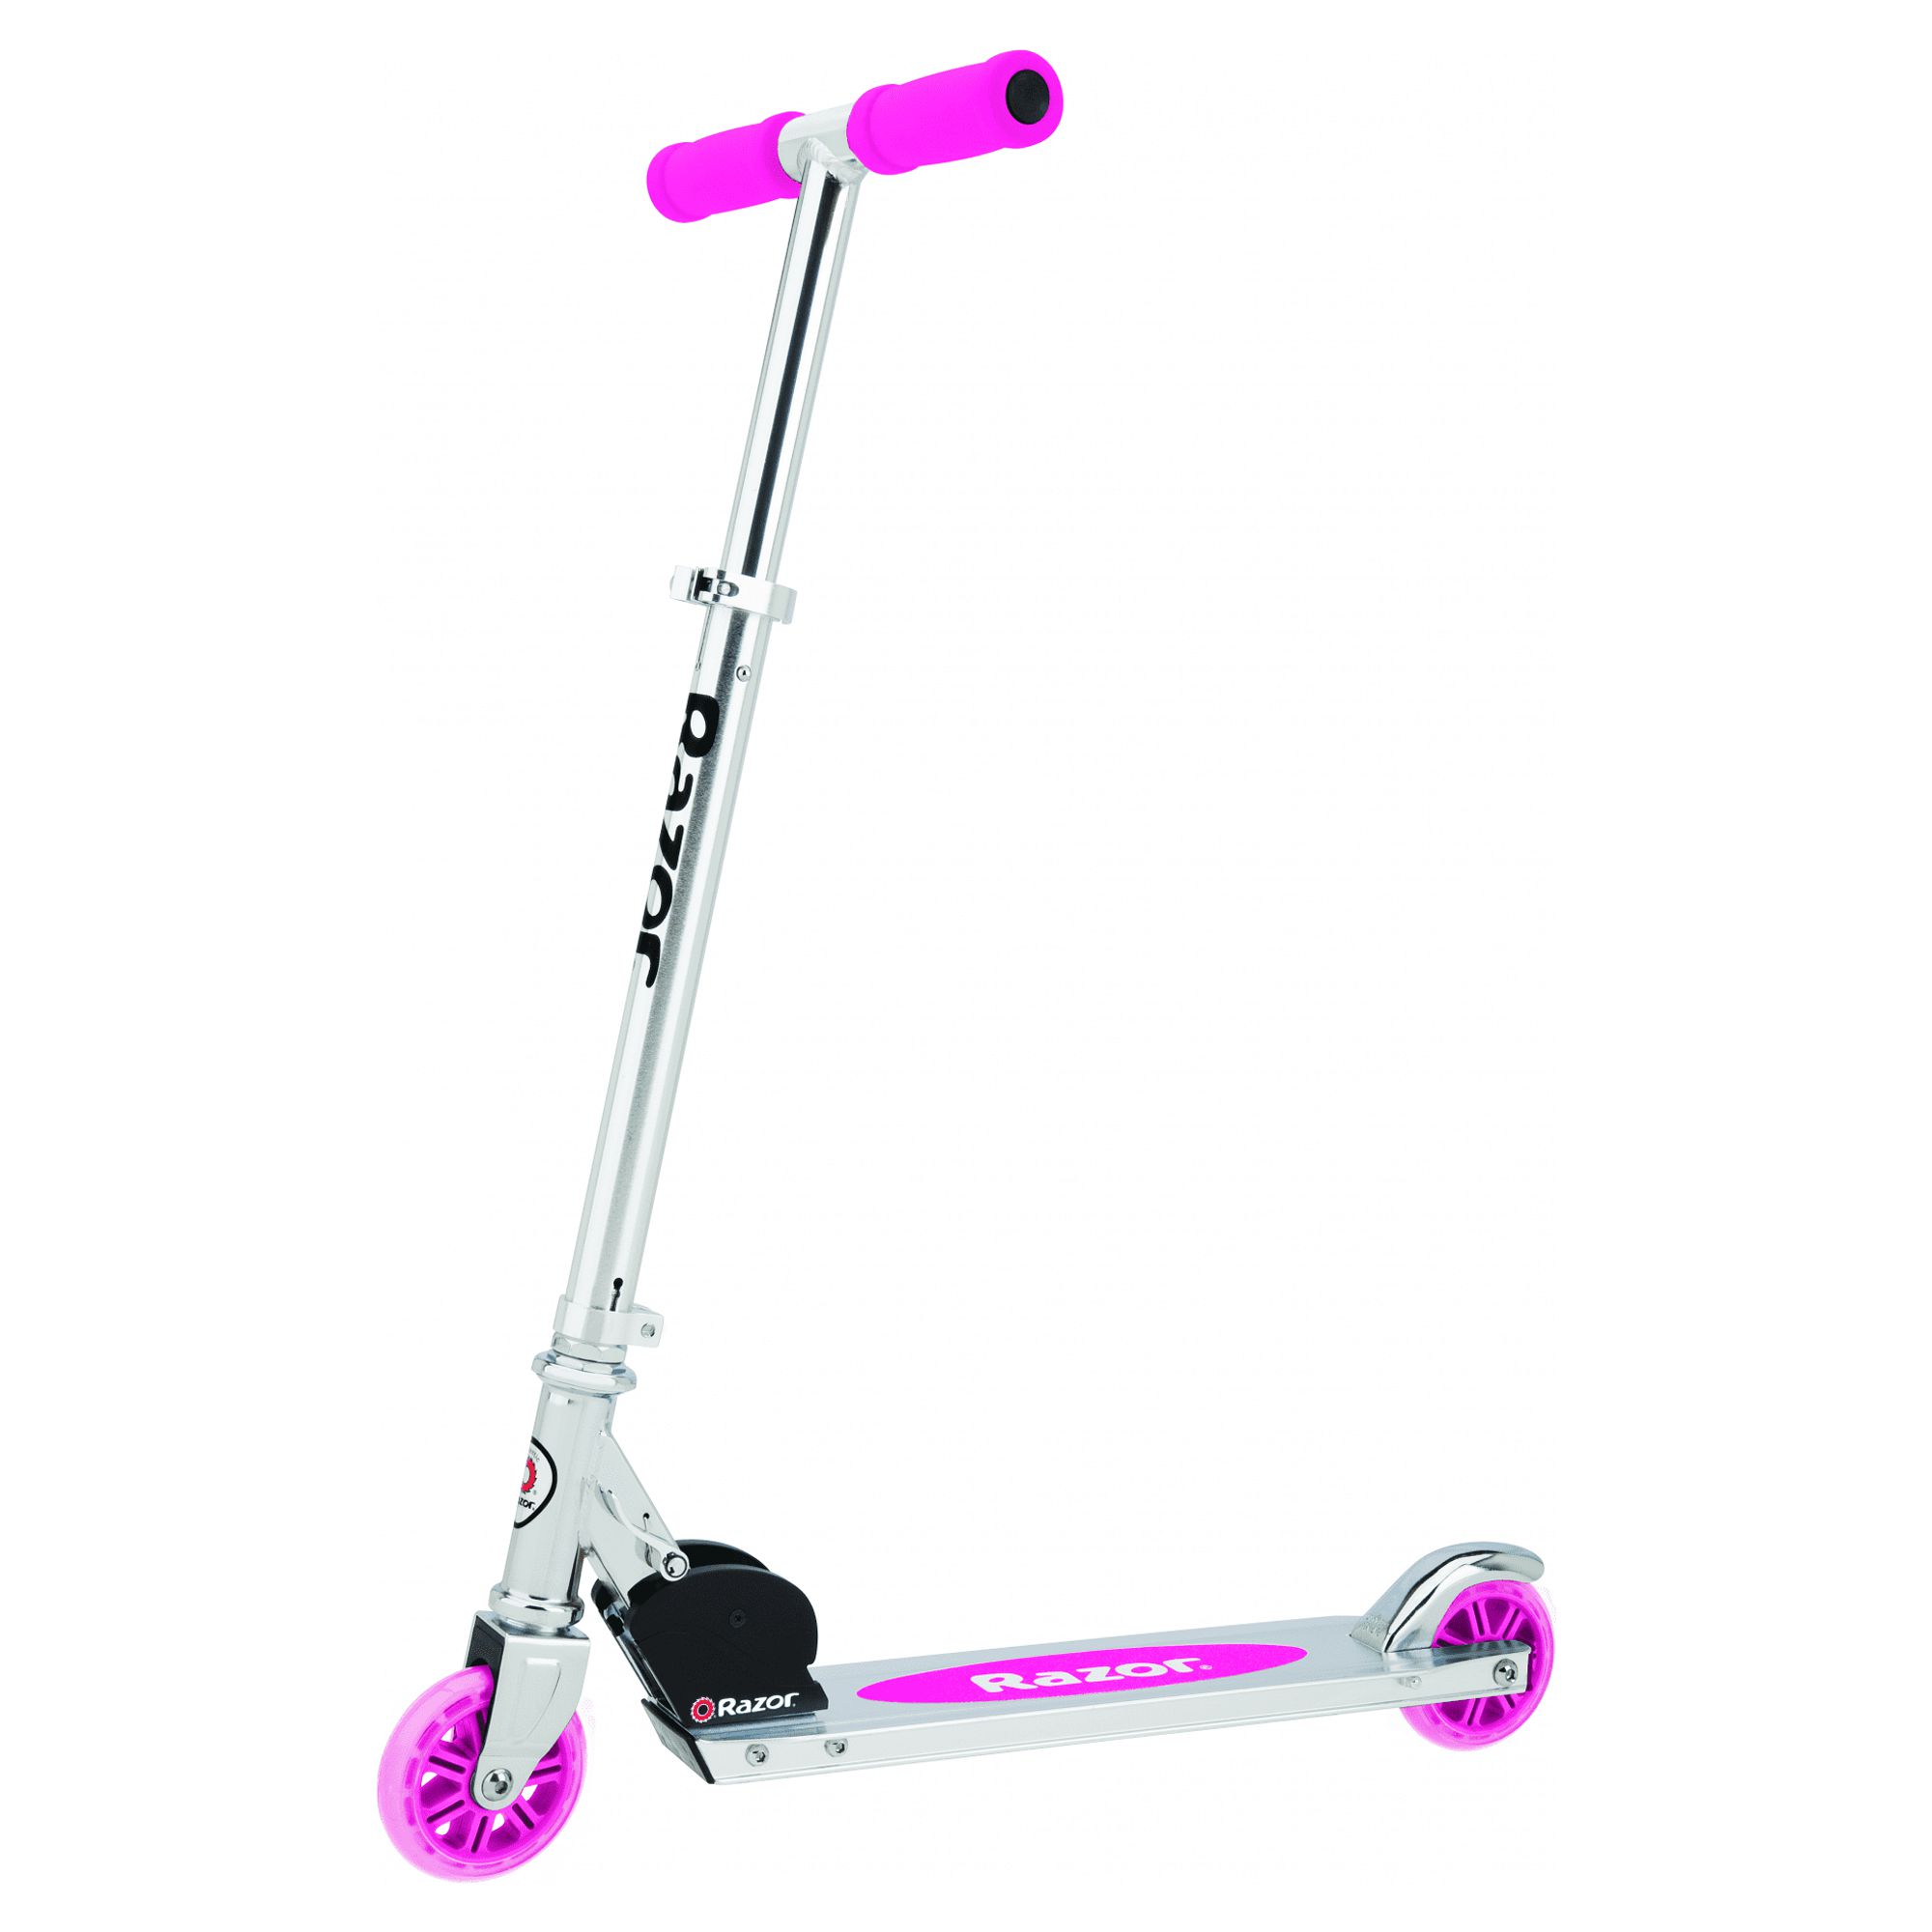 Razor A Kick Scooter for Kids - Pink, Lightweight, Foldable, Aluminum Frame, for Child Ages 5+ - image 1 of 9